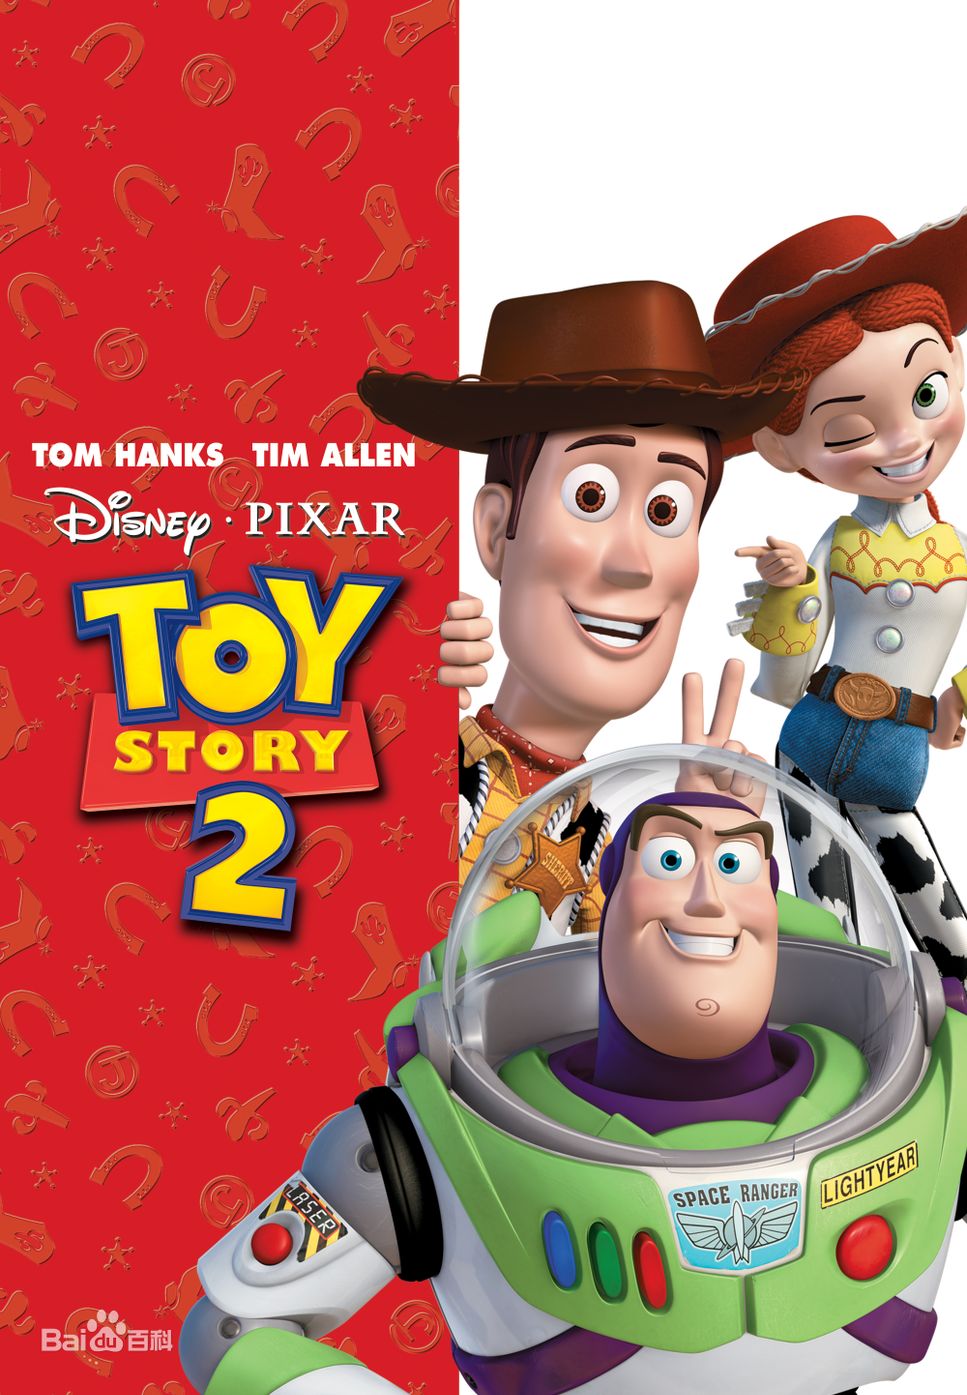 Randy Newman - When She Loved Me (TOY STORY 2 OST - For Piano Solo) by poon